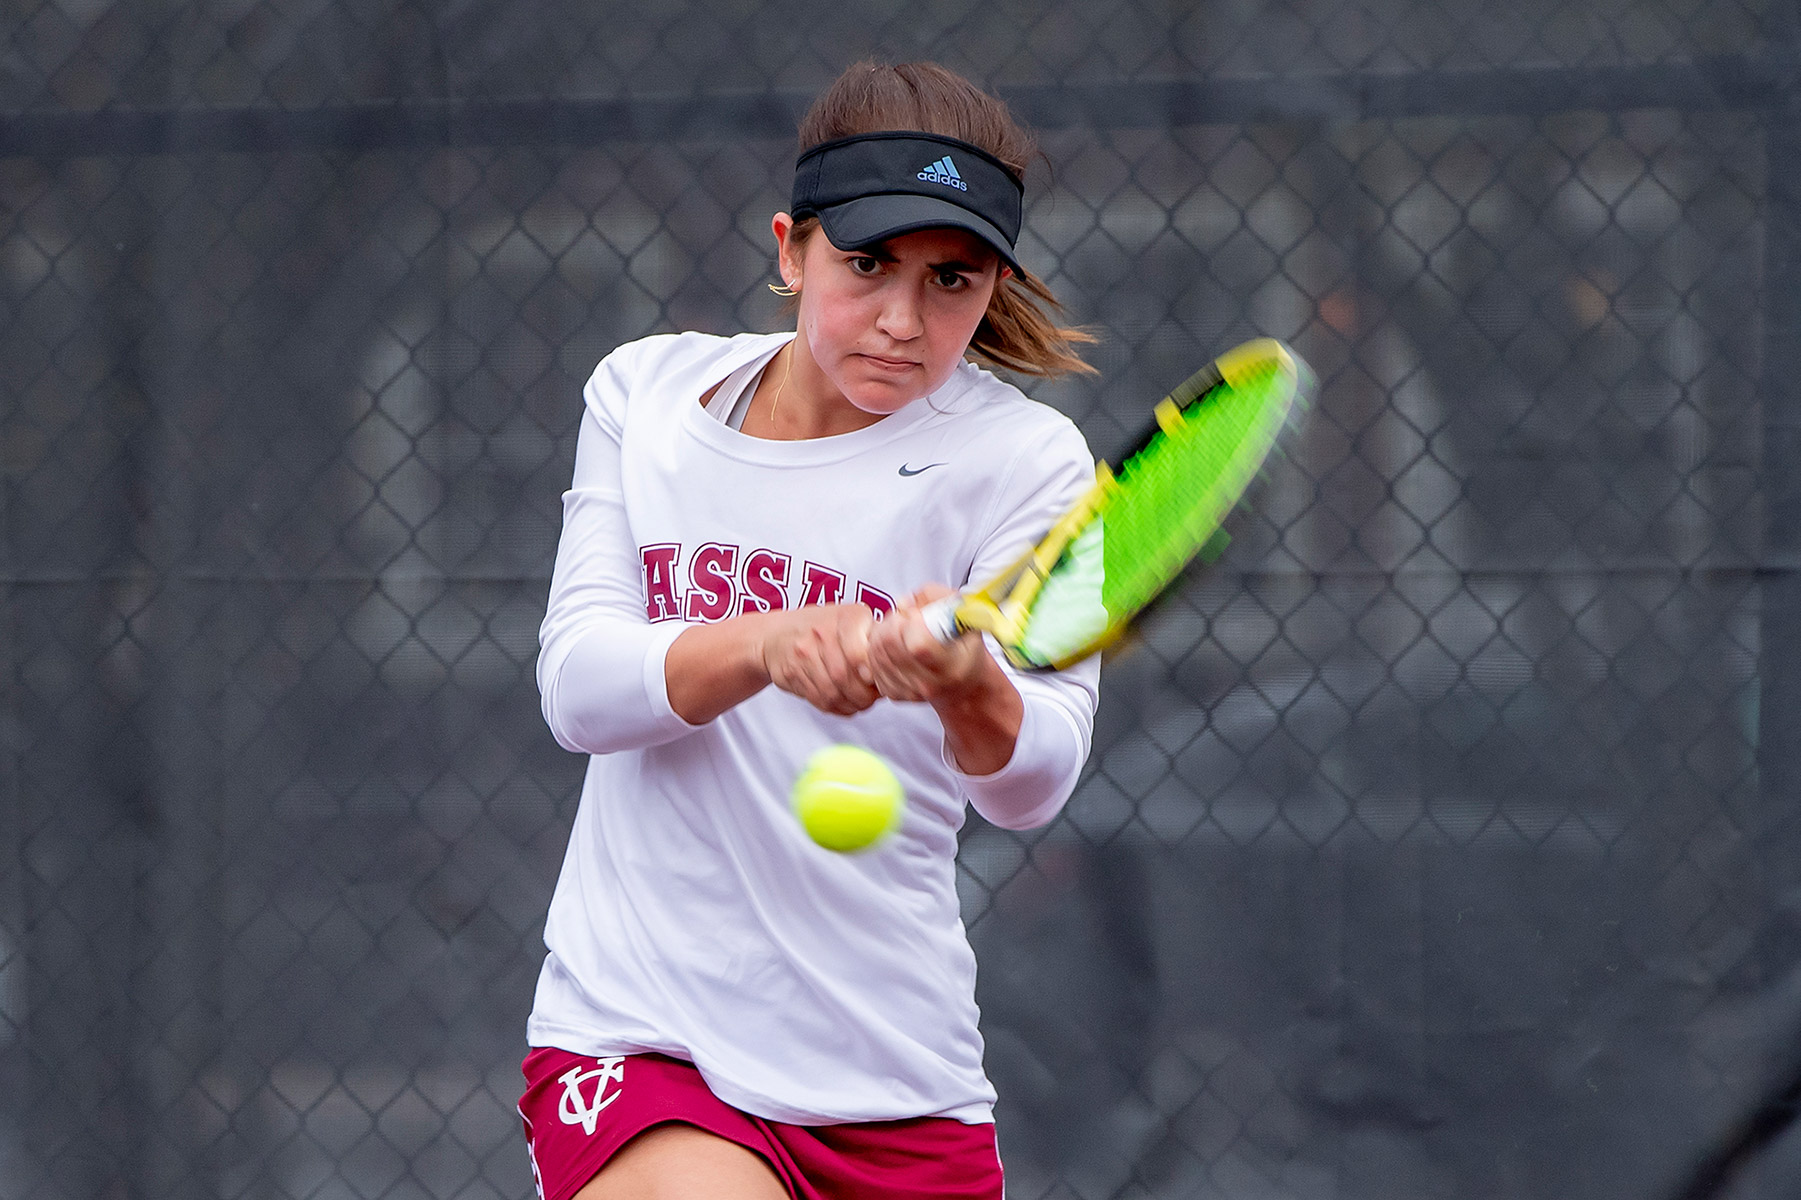 Pictured: Macey Dowd ’25 - Woman hitting a two-handed backhand on a tennis court.